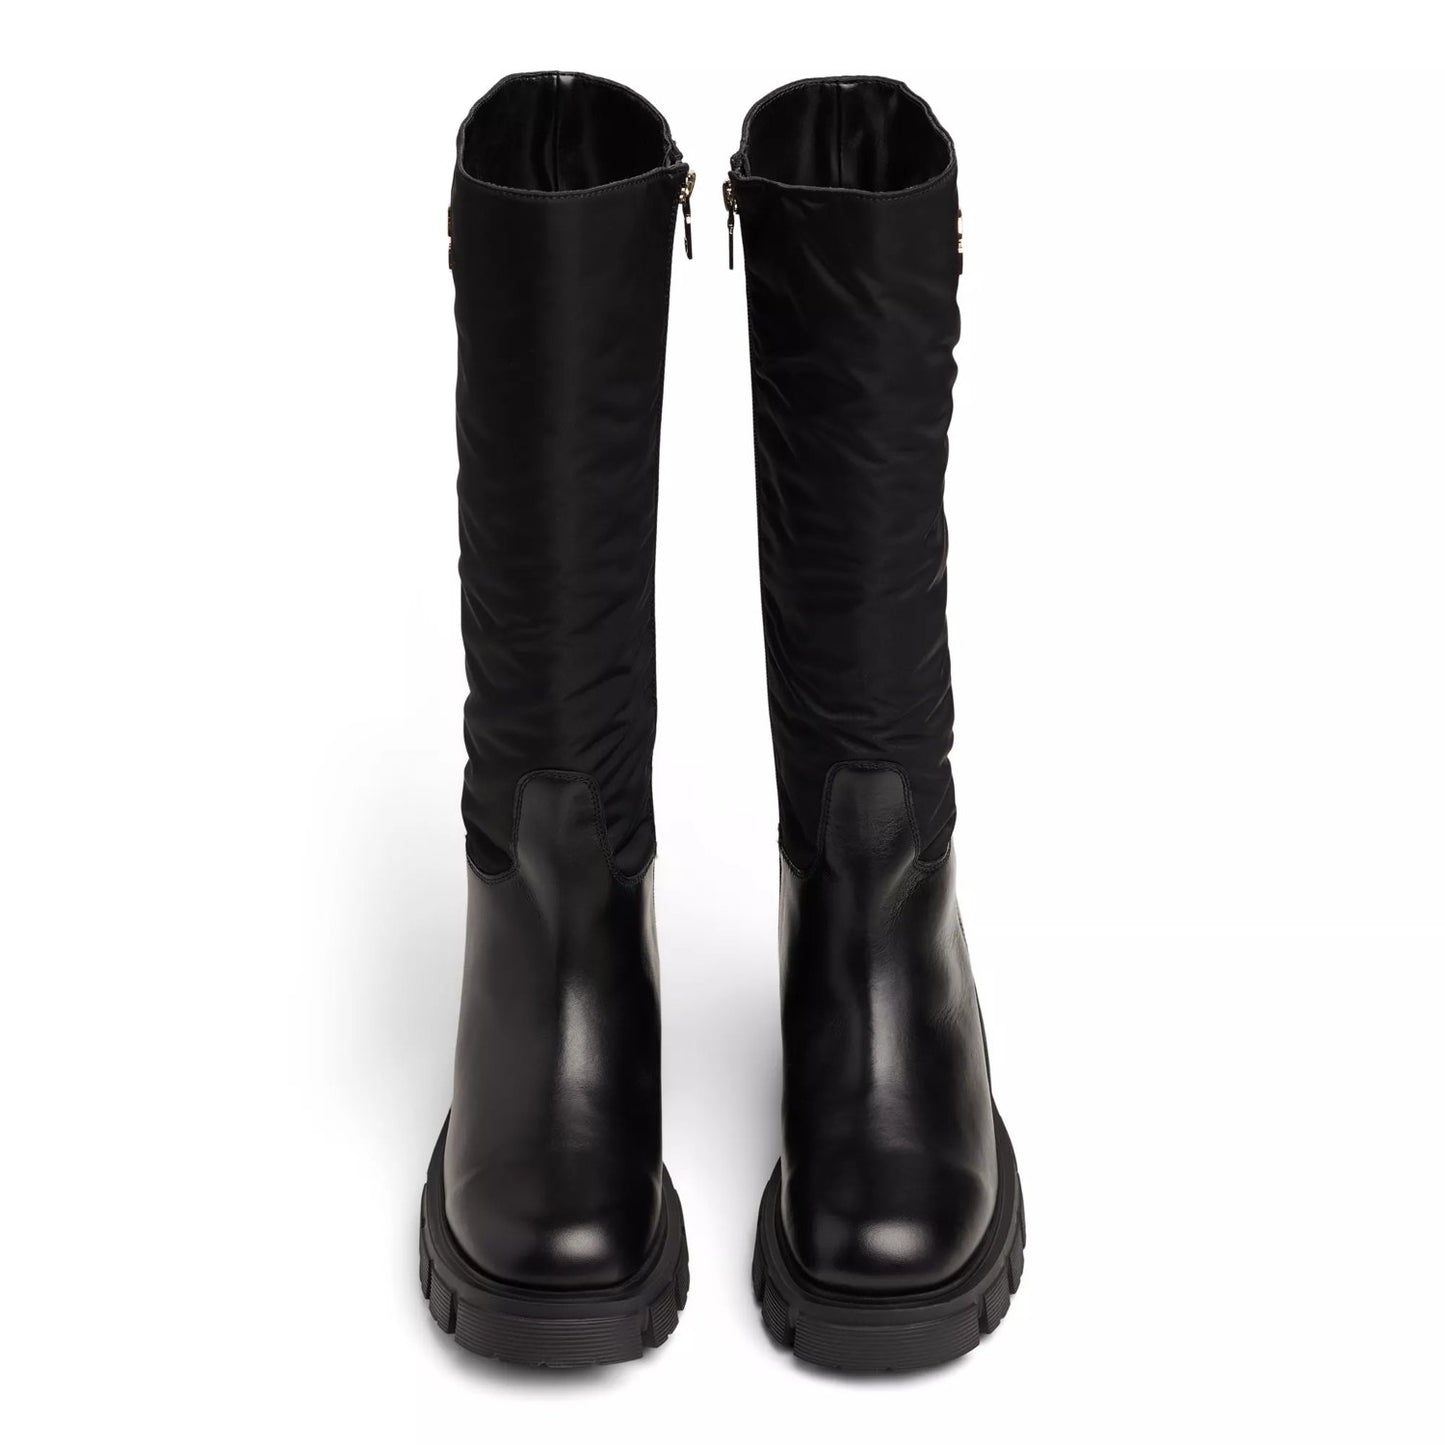 Stivaled Knee-High Riding Boots